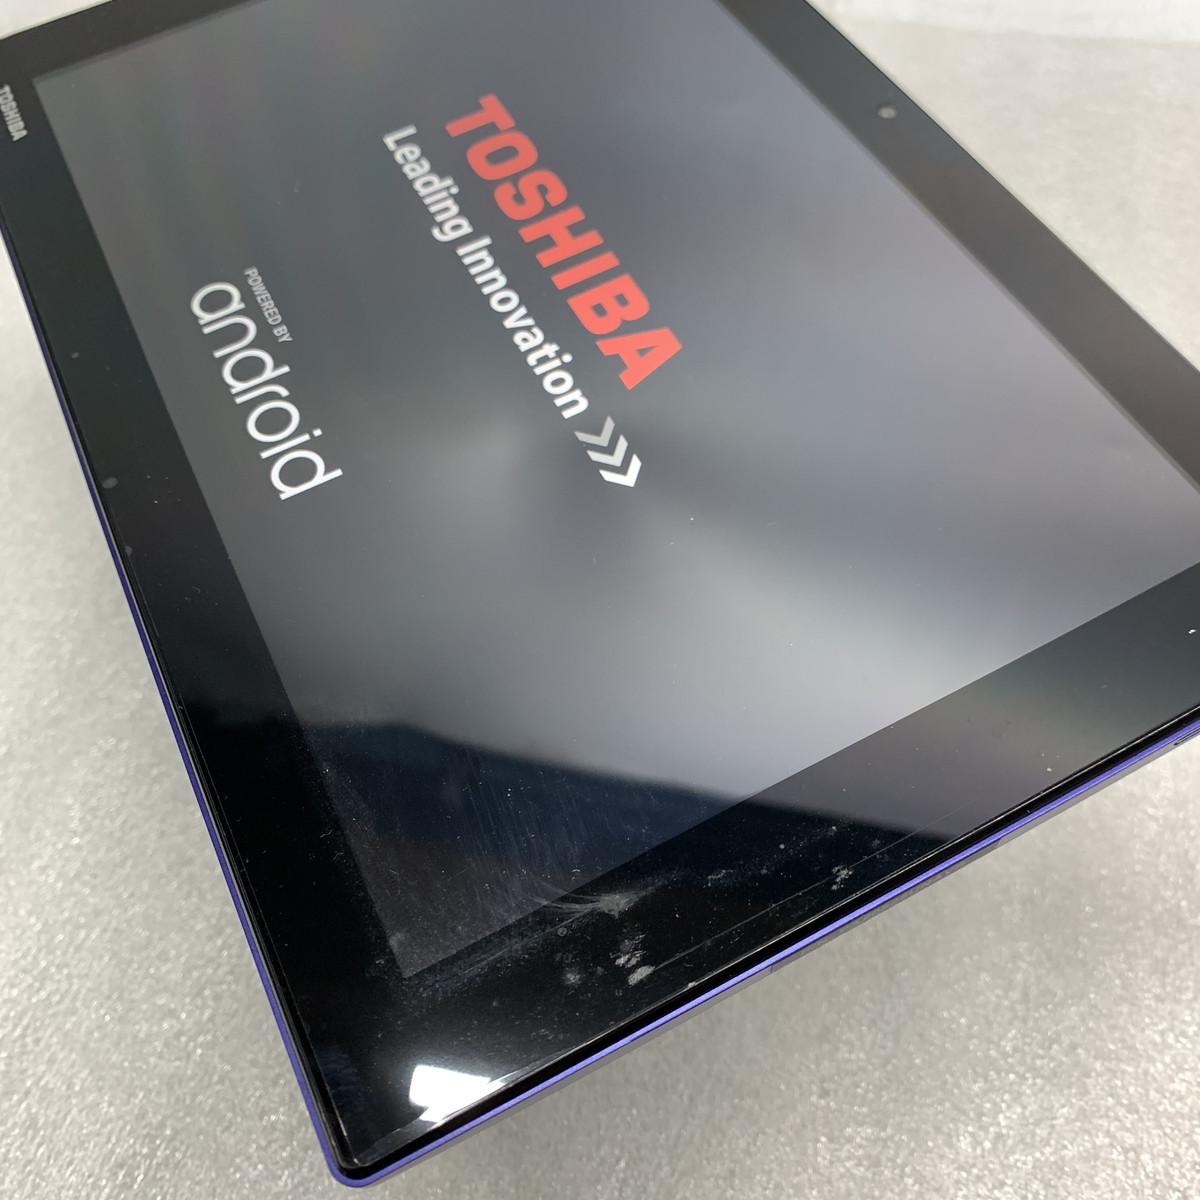 ◇ TOSHIBA タブレット [ A205 ] OS:Android5 【動作確認/初期化済み】 【使用感/傷汚れあり】 東芝 / 中古(S240205_6)_画像7